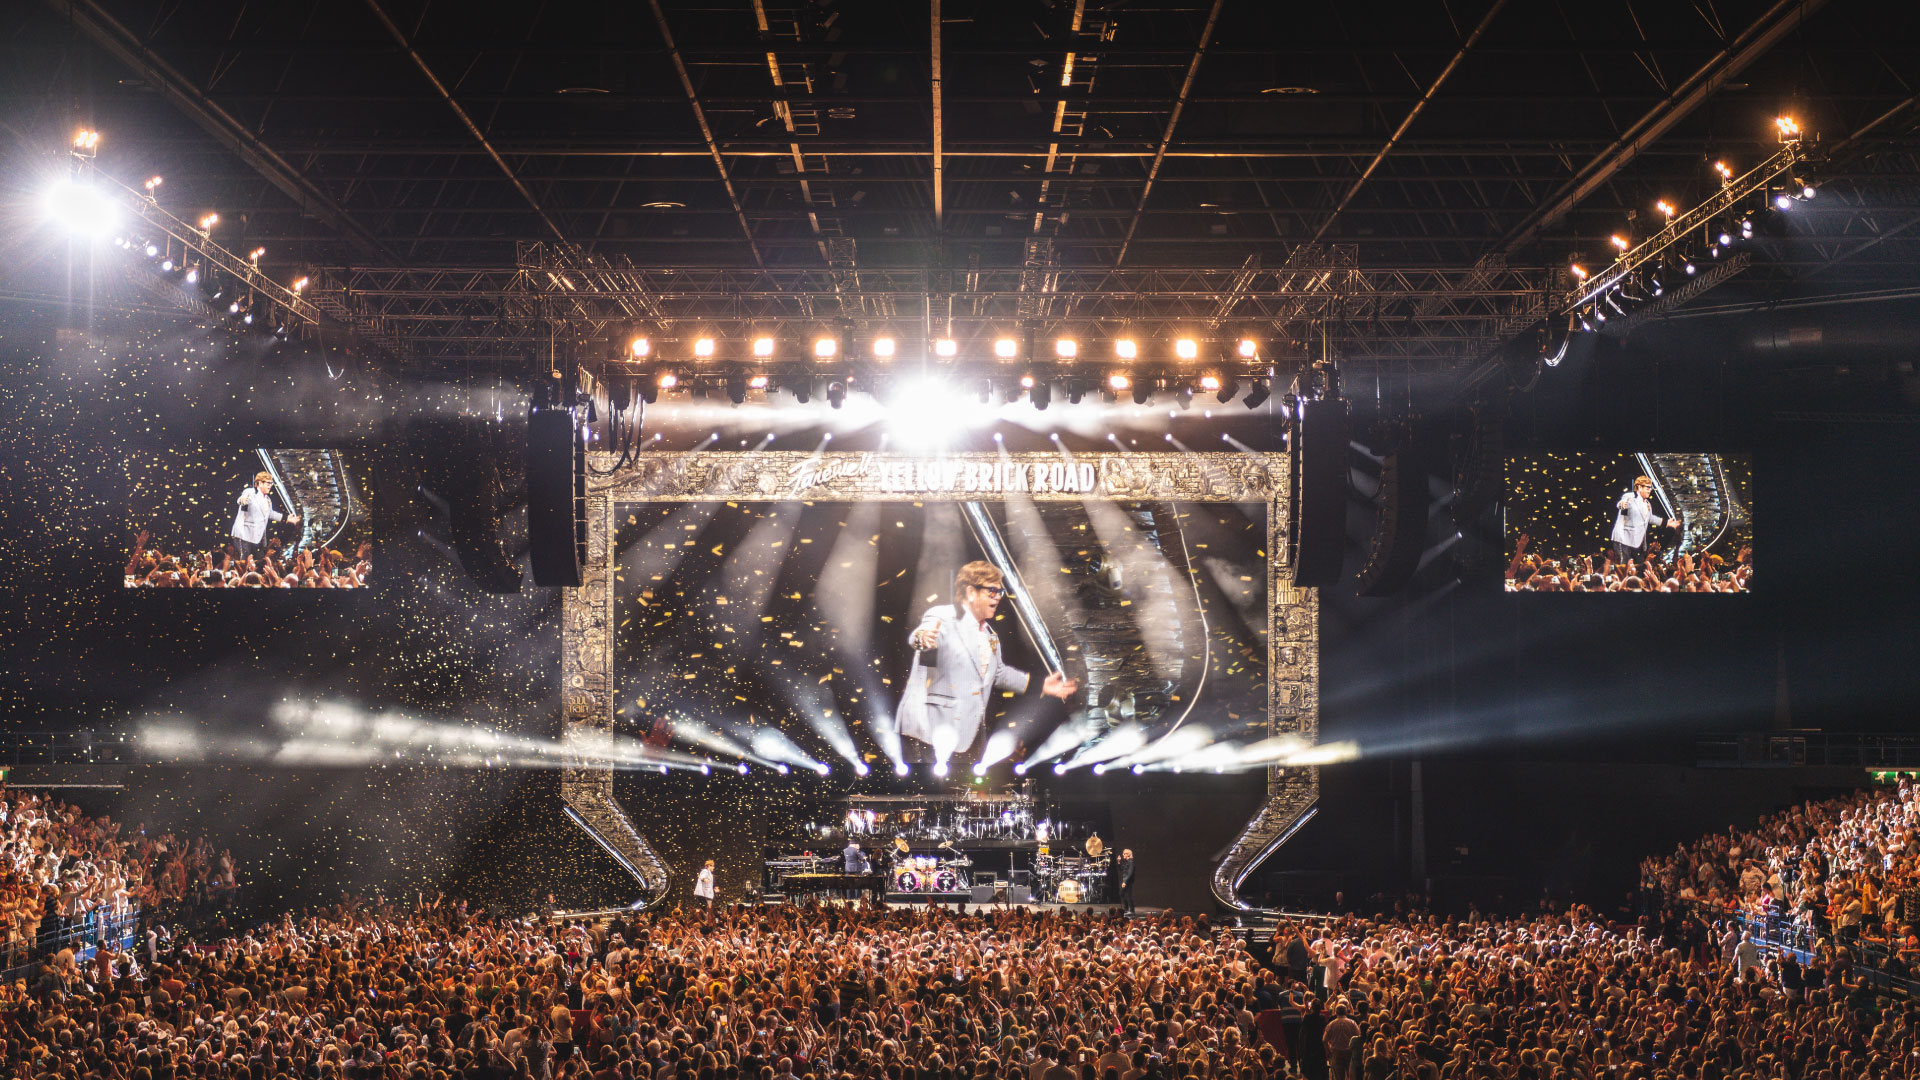 PRG is honoured to work with the wonderful Elton John team, delivering lighting and rigging for this historic farewell world tour.